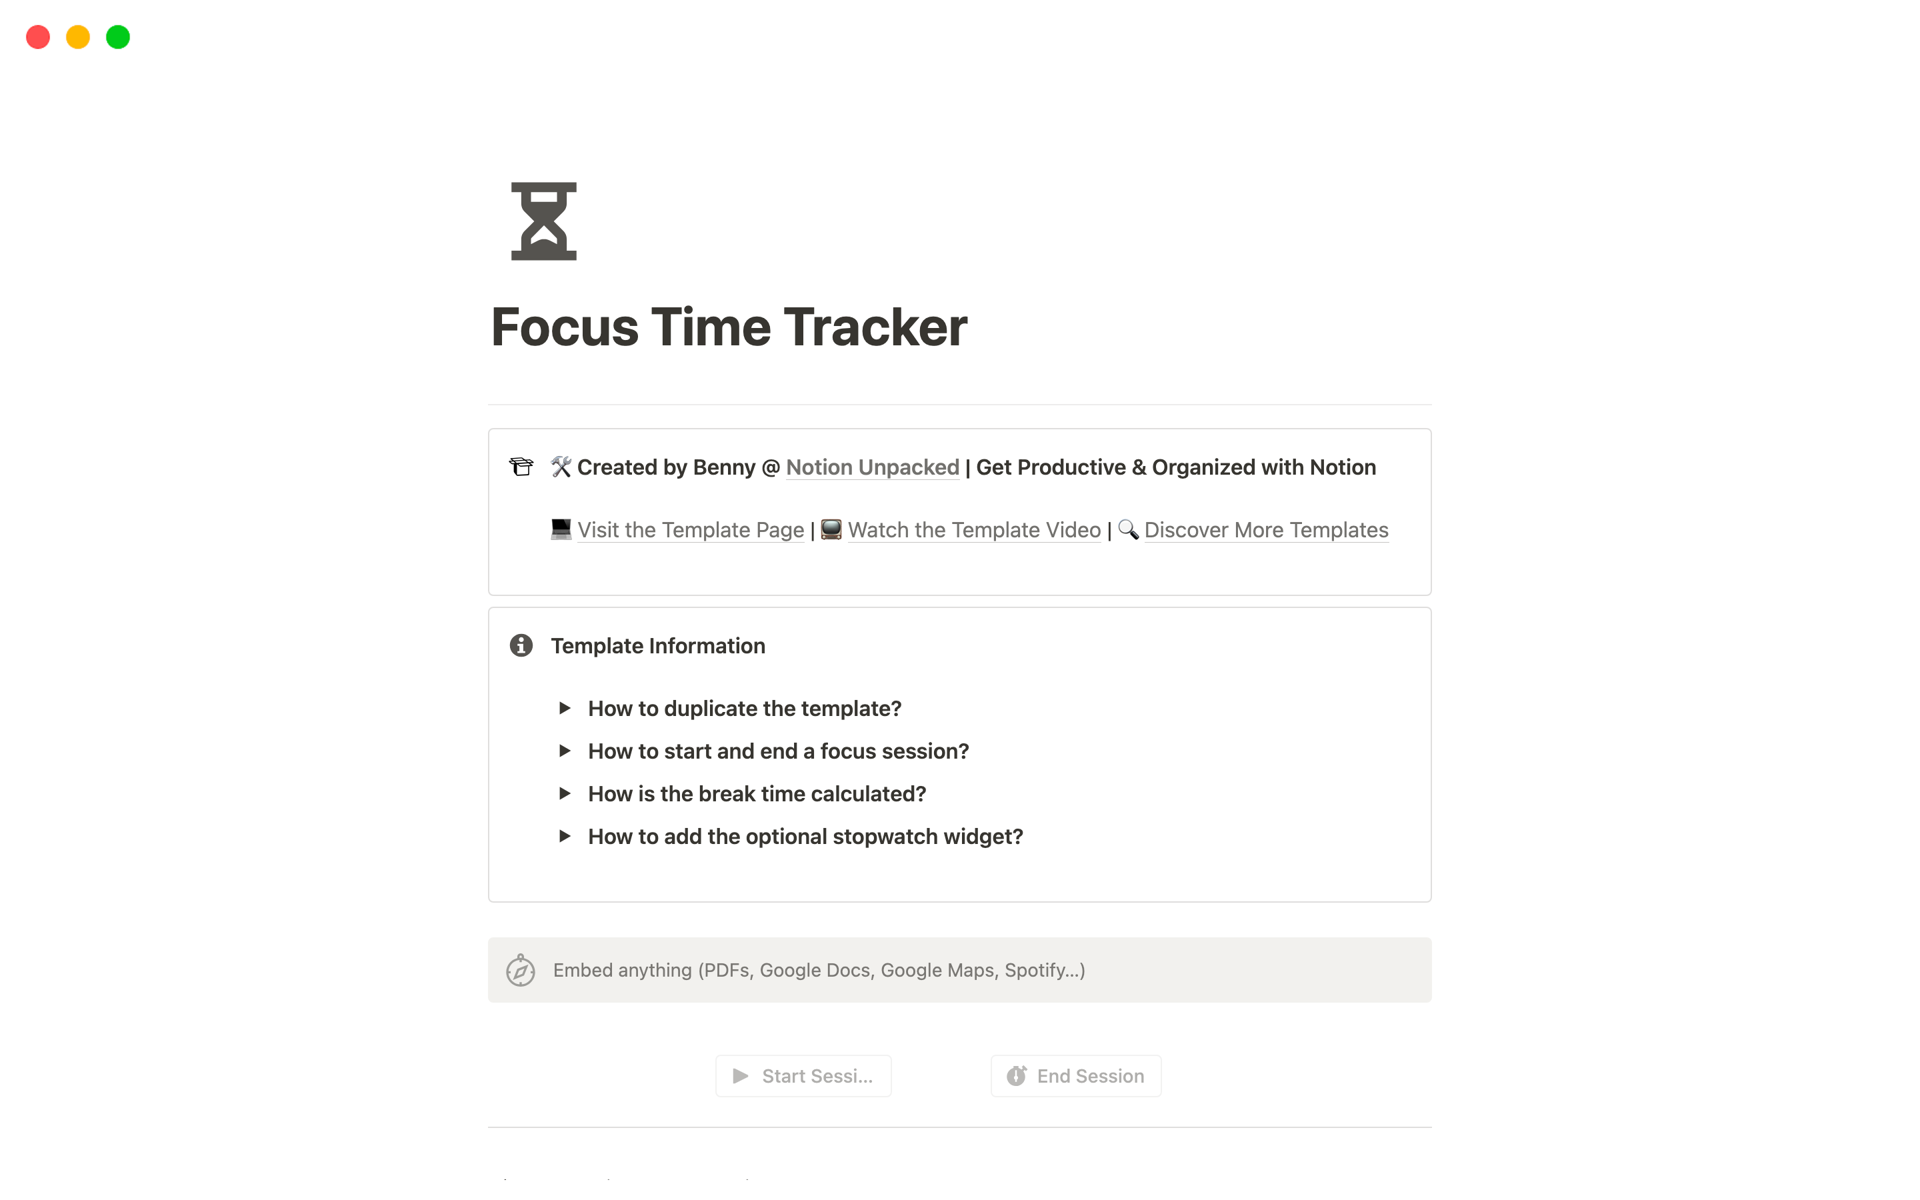 This Notion focus timer template is the perfect productivity tool to keep track of your focused work sessions, to make sure that you take sufficient breaks, and to train your focus over time.